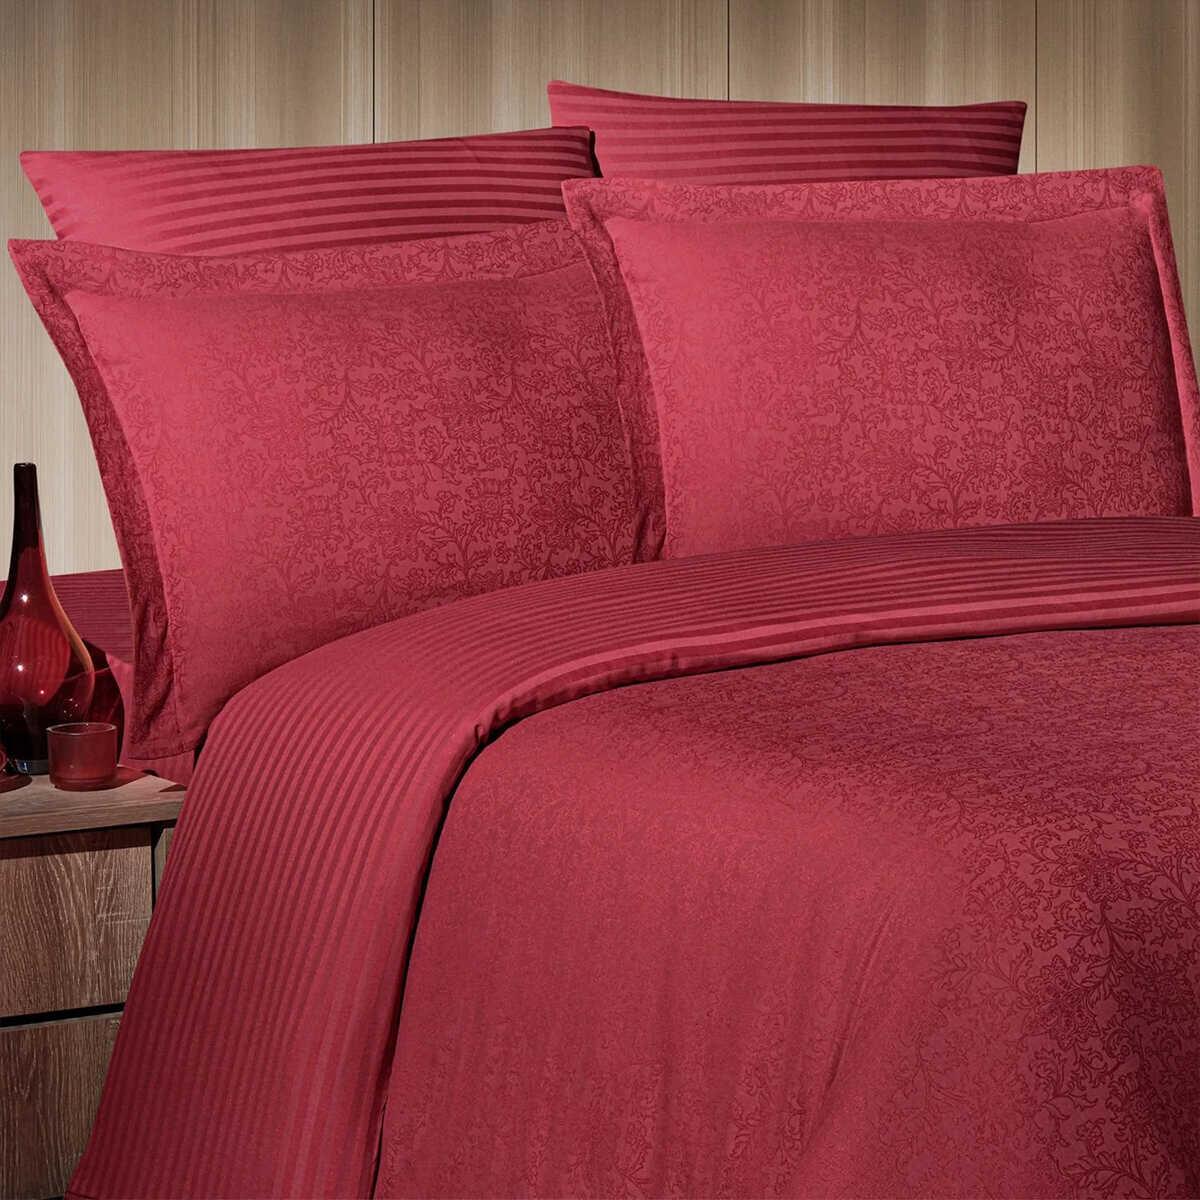 Maxstyle Jacquard Reyka Claret Red Double Duvet Cover Set